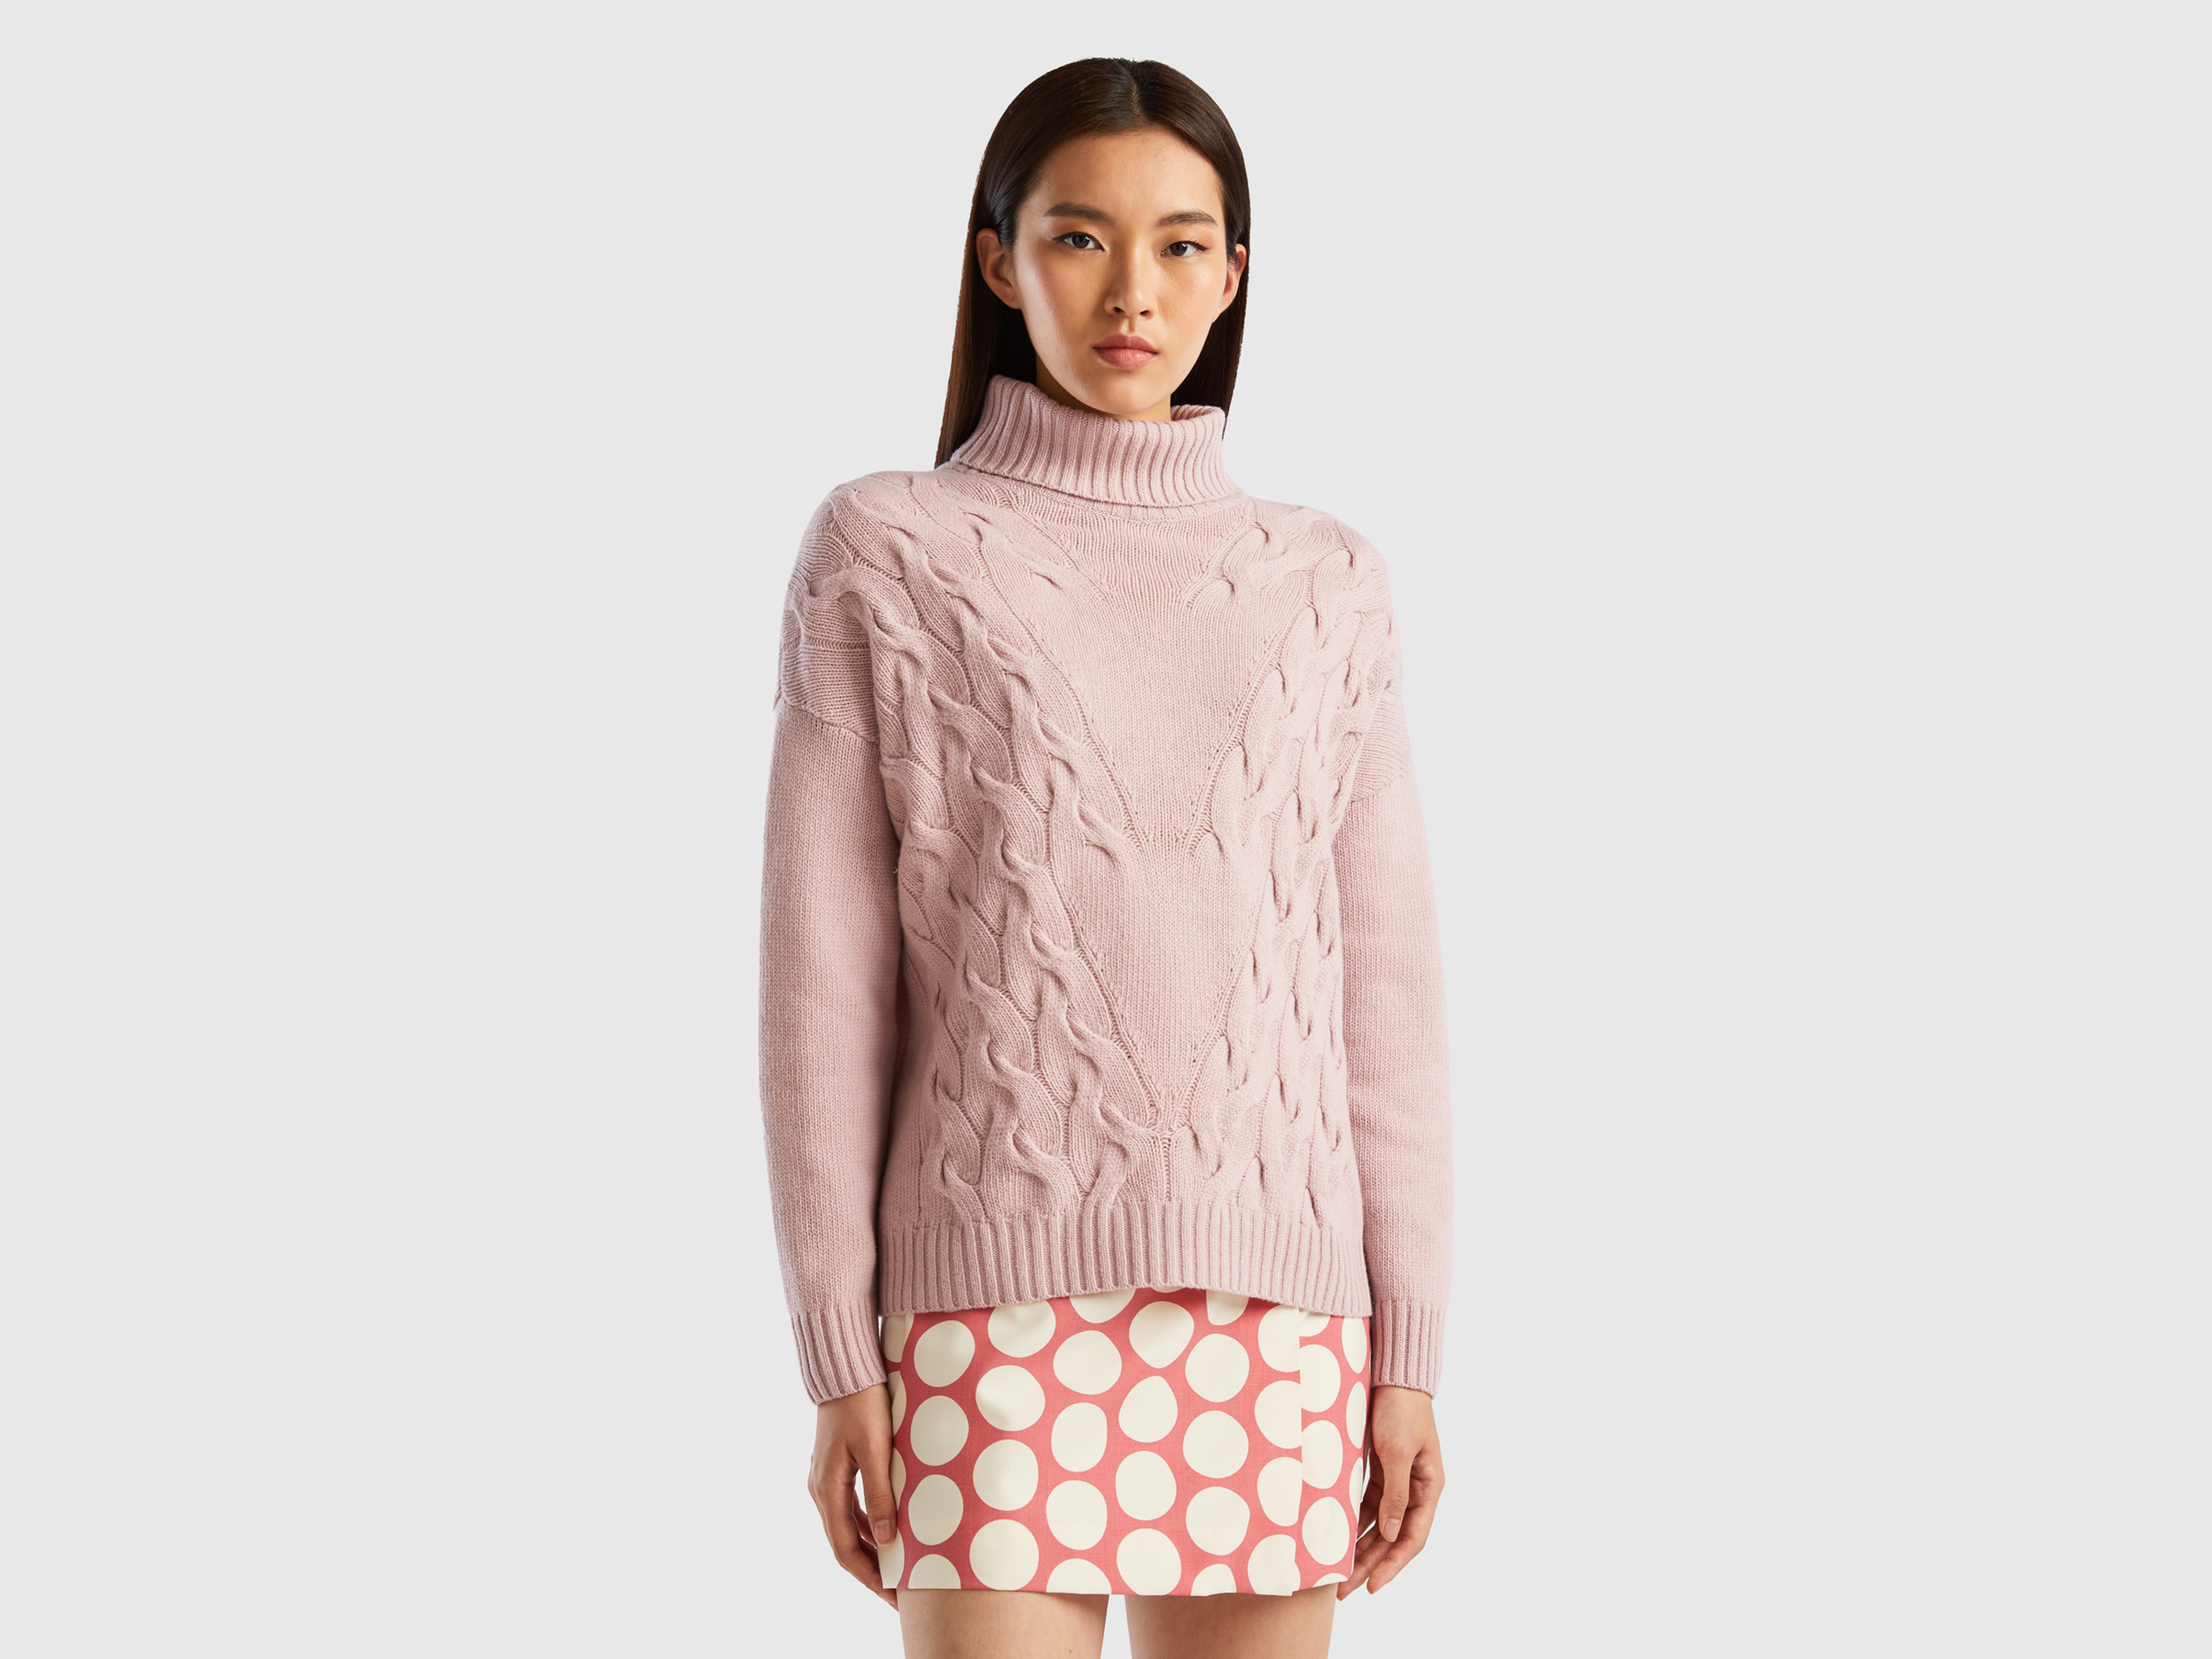 Benetton, Turtleneck With Cables, size L-XL, Soft Pink, Women